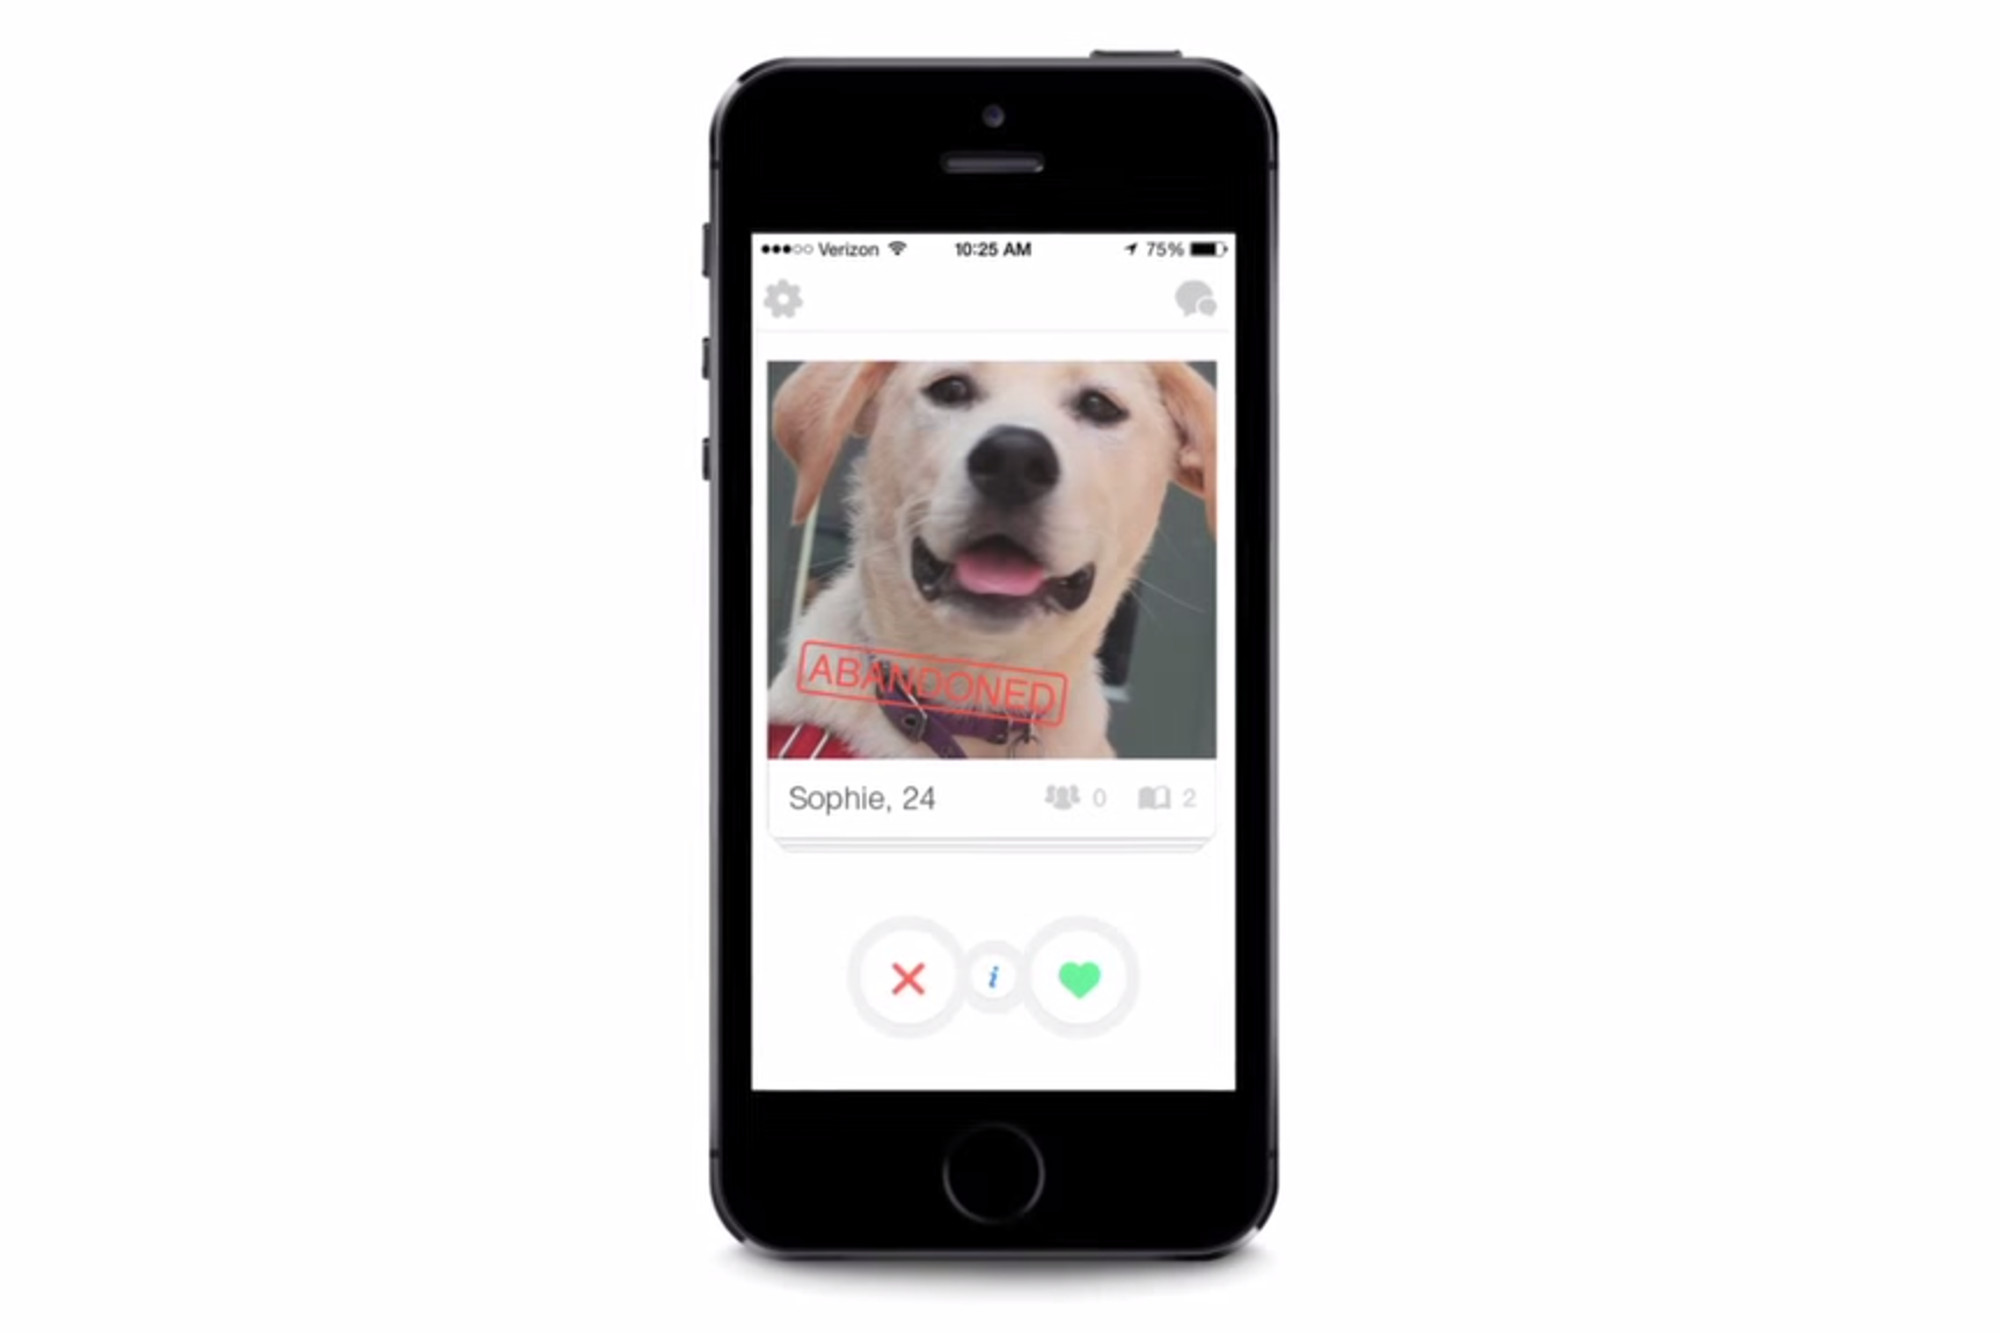 Swipe right on Tinder to hook up or adopt a dog - The Verge